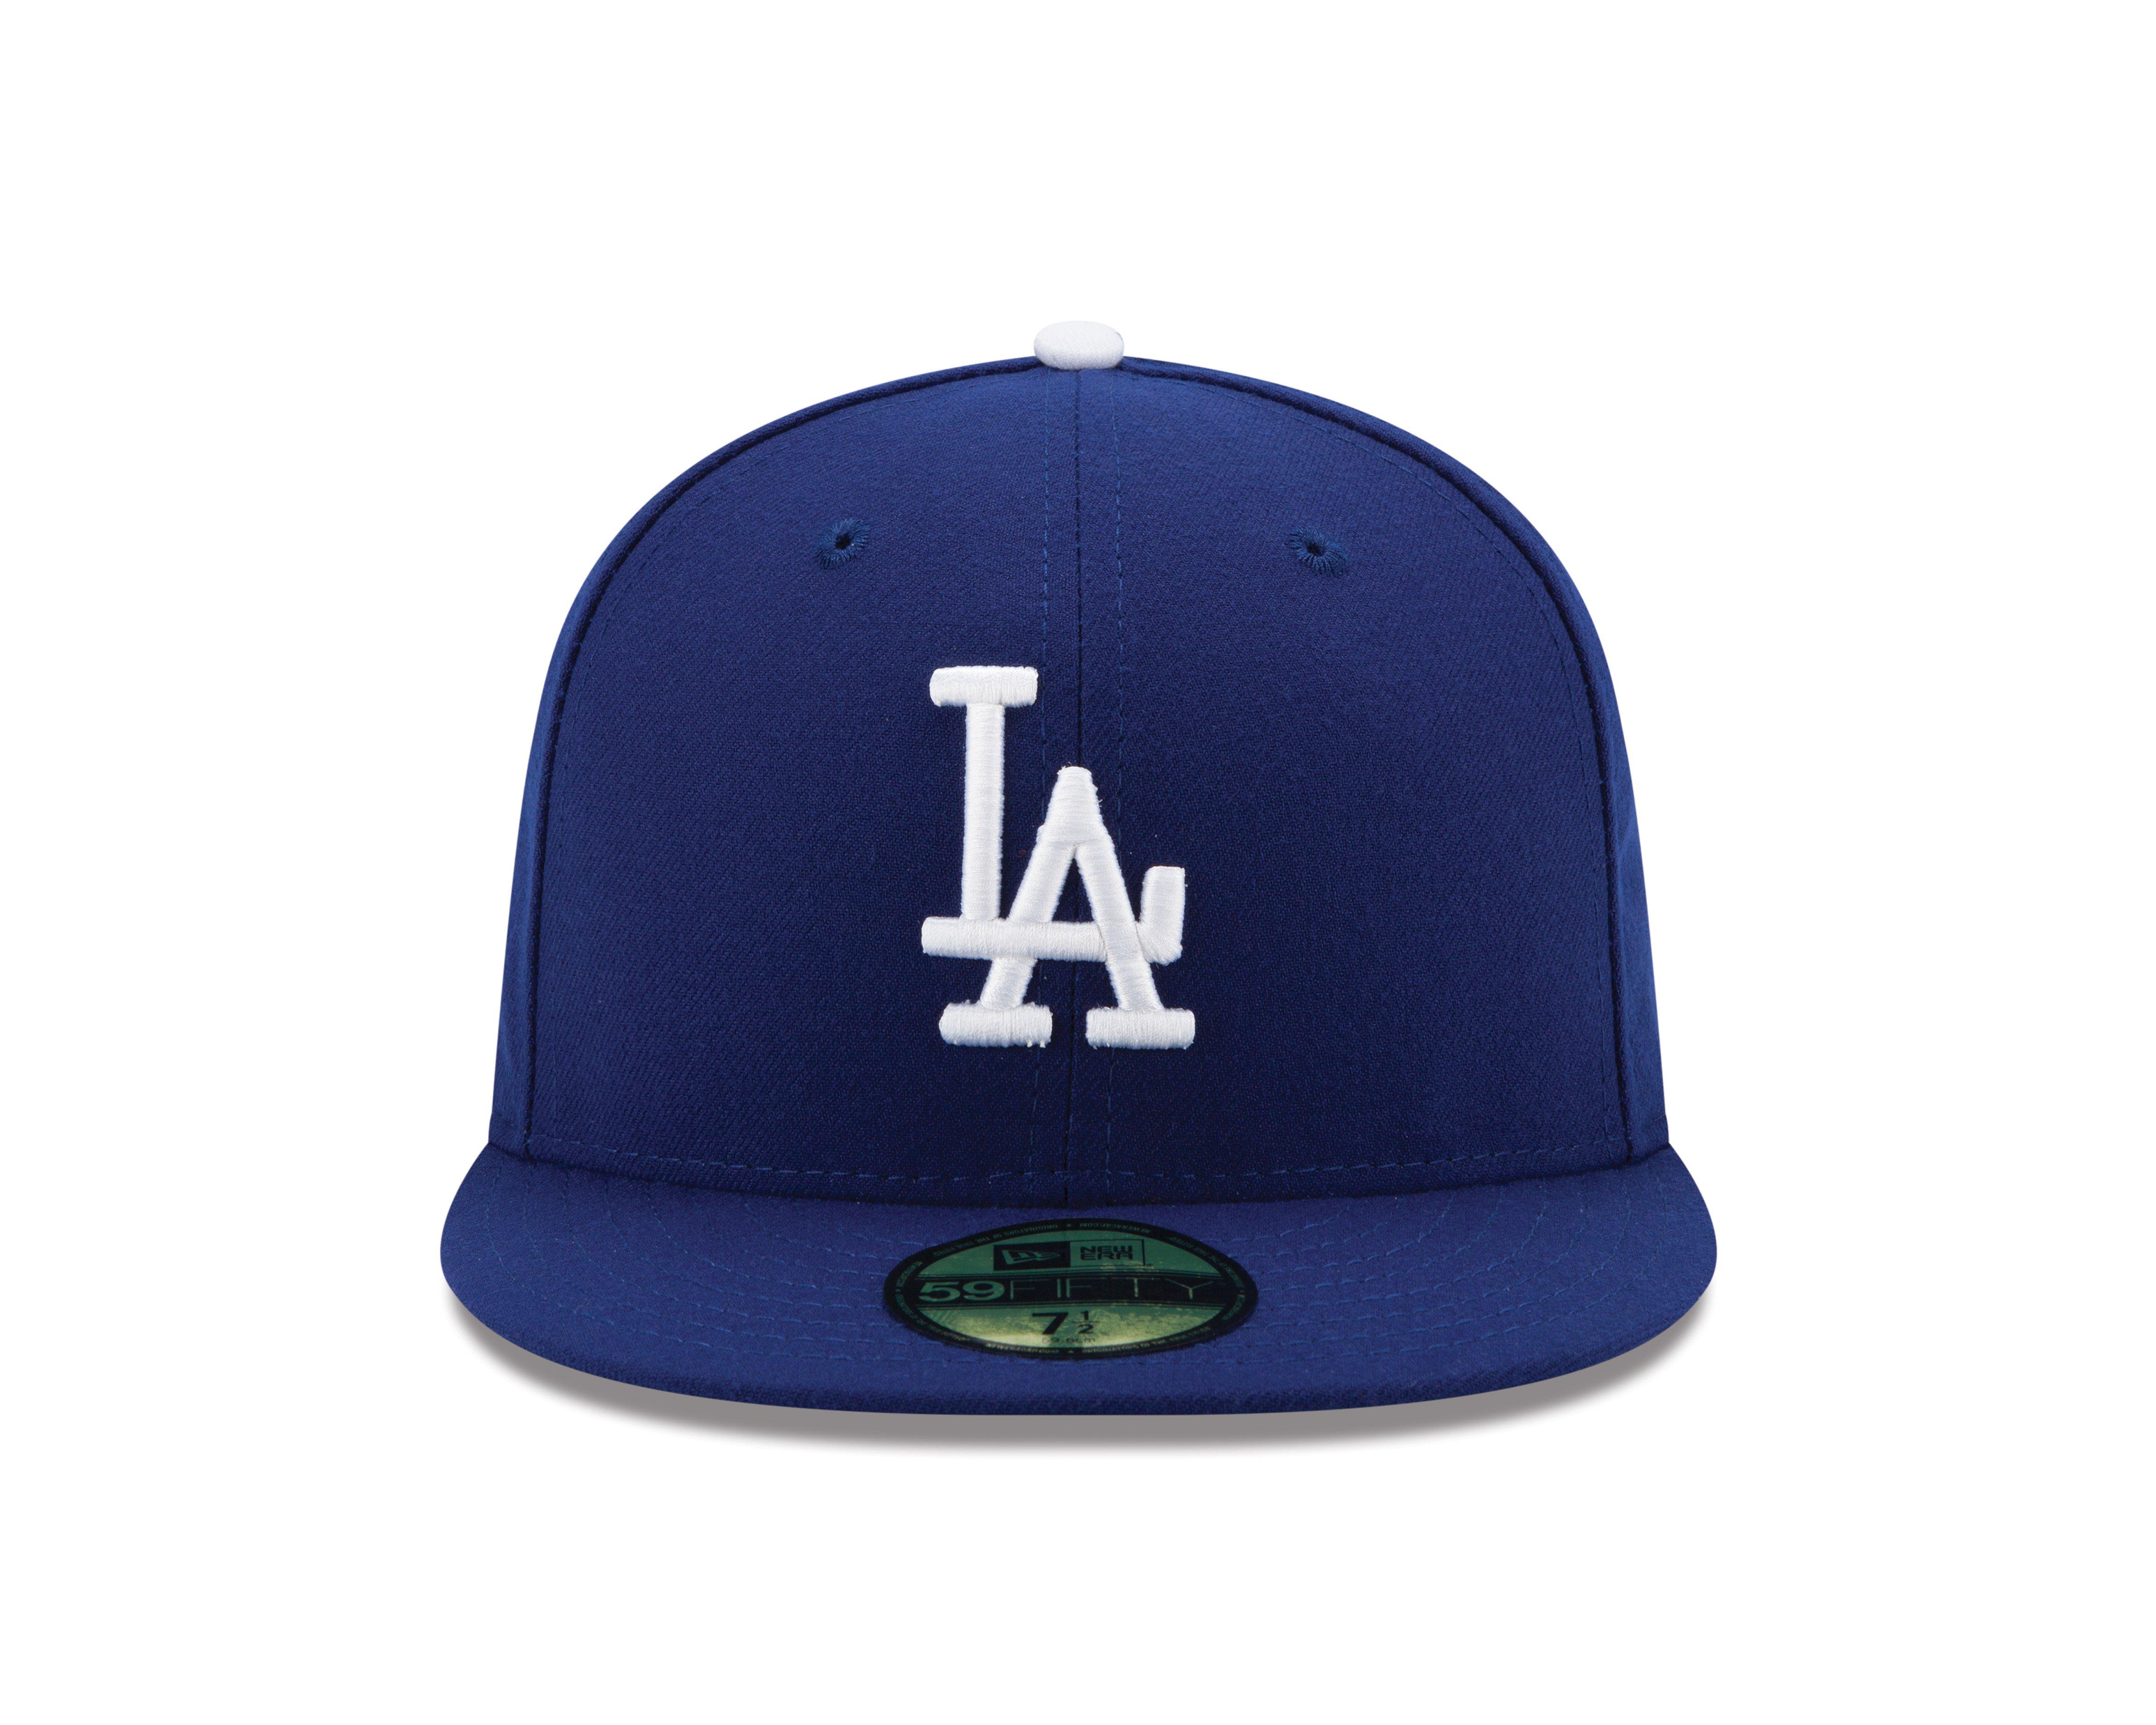 New Era Los Angeles Dodgers Dazed and Confused 59FIFTY Fitted Hat - Hibbett